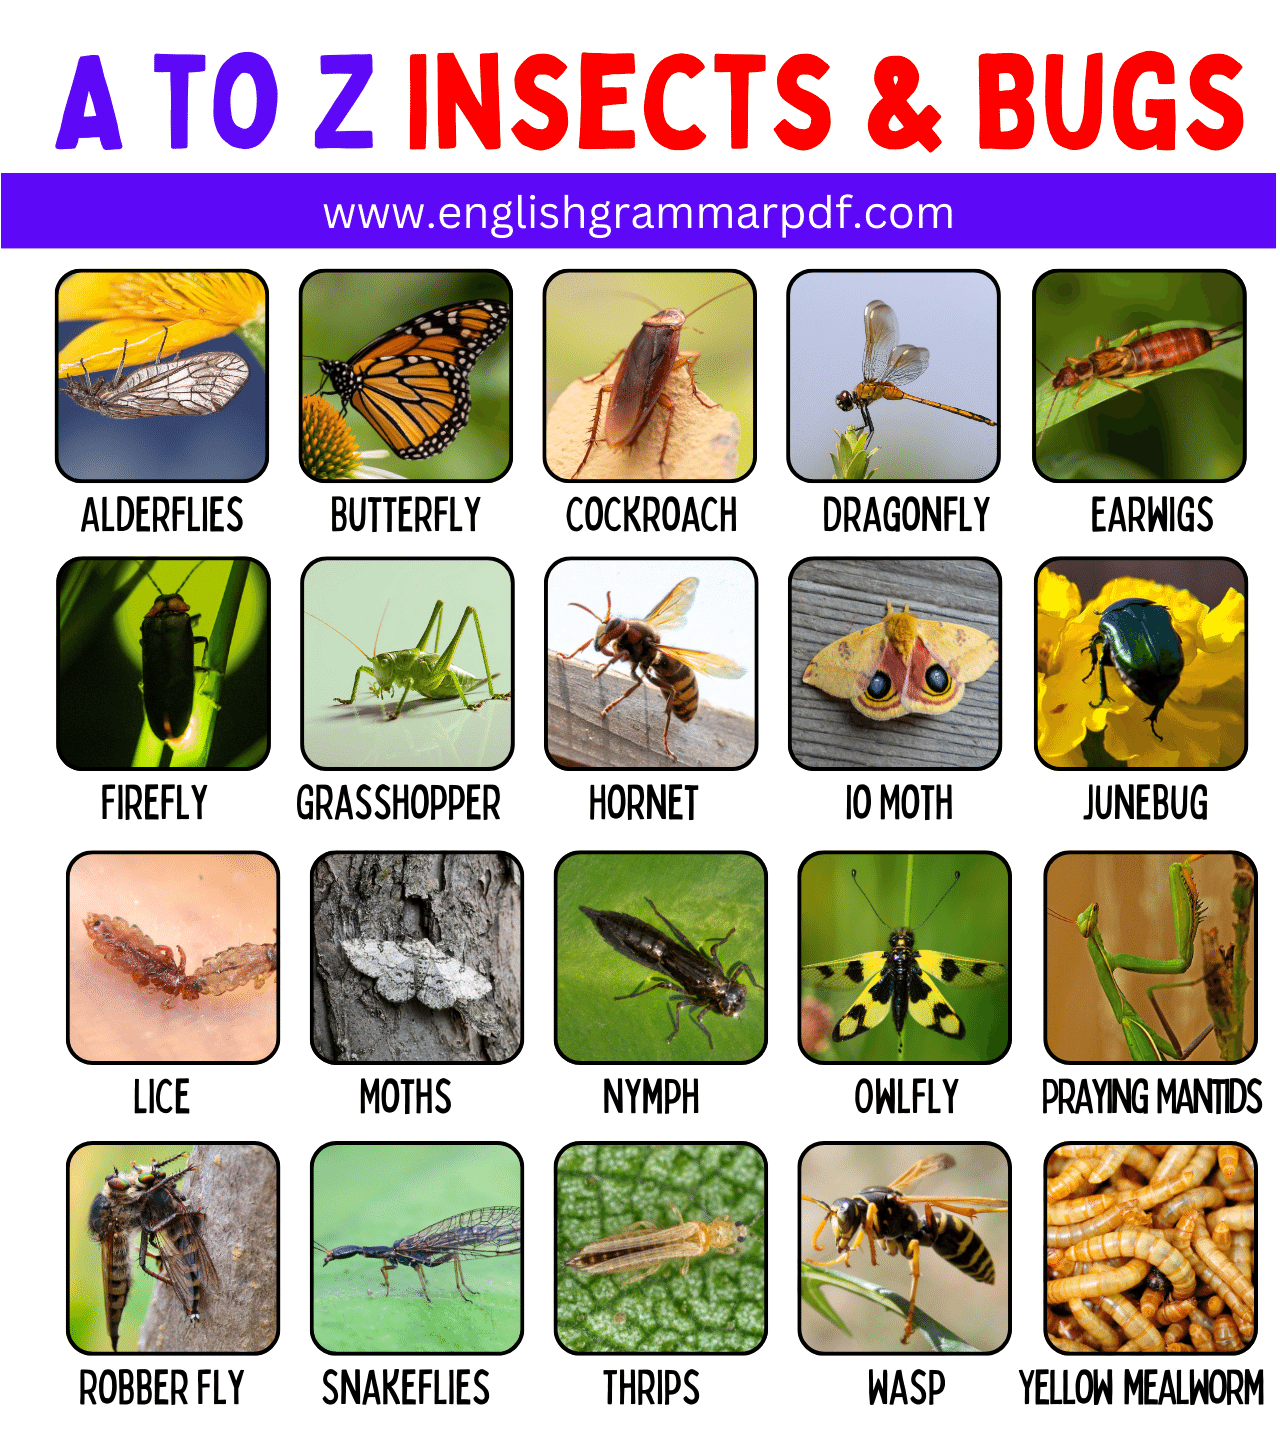 A to Z Insects & Bugs